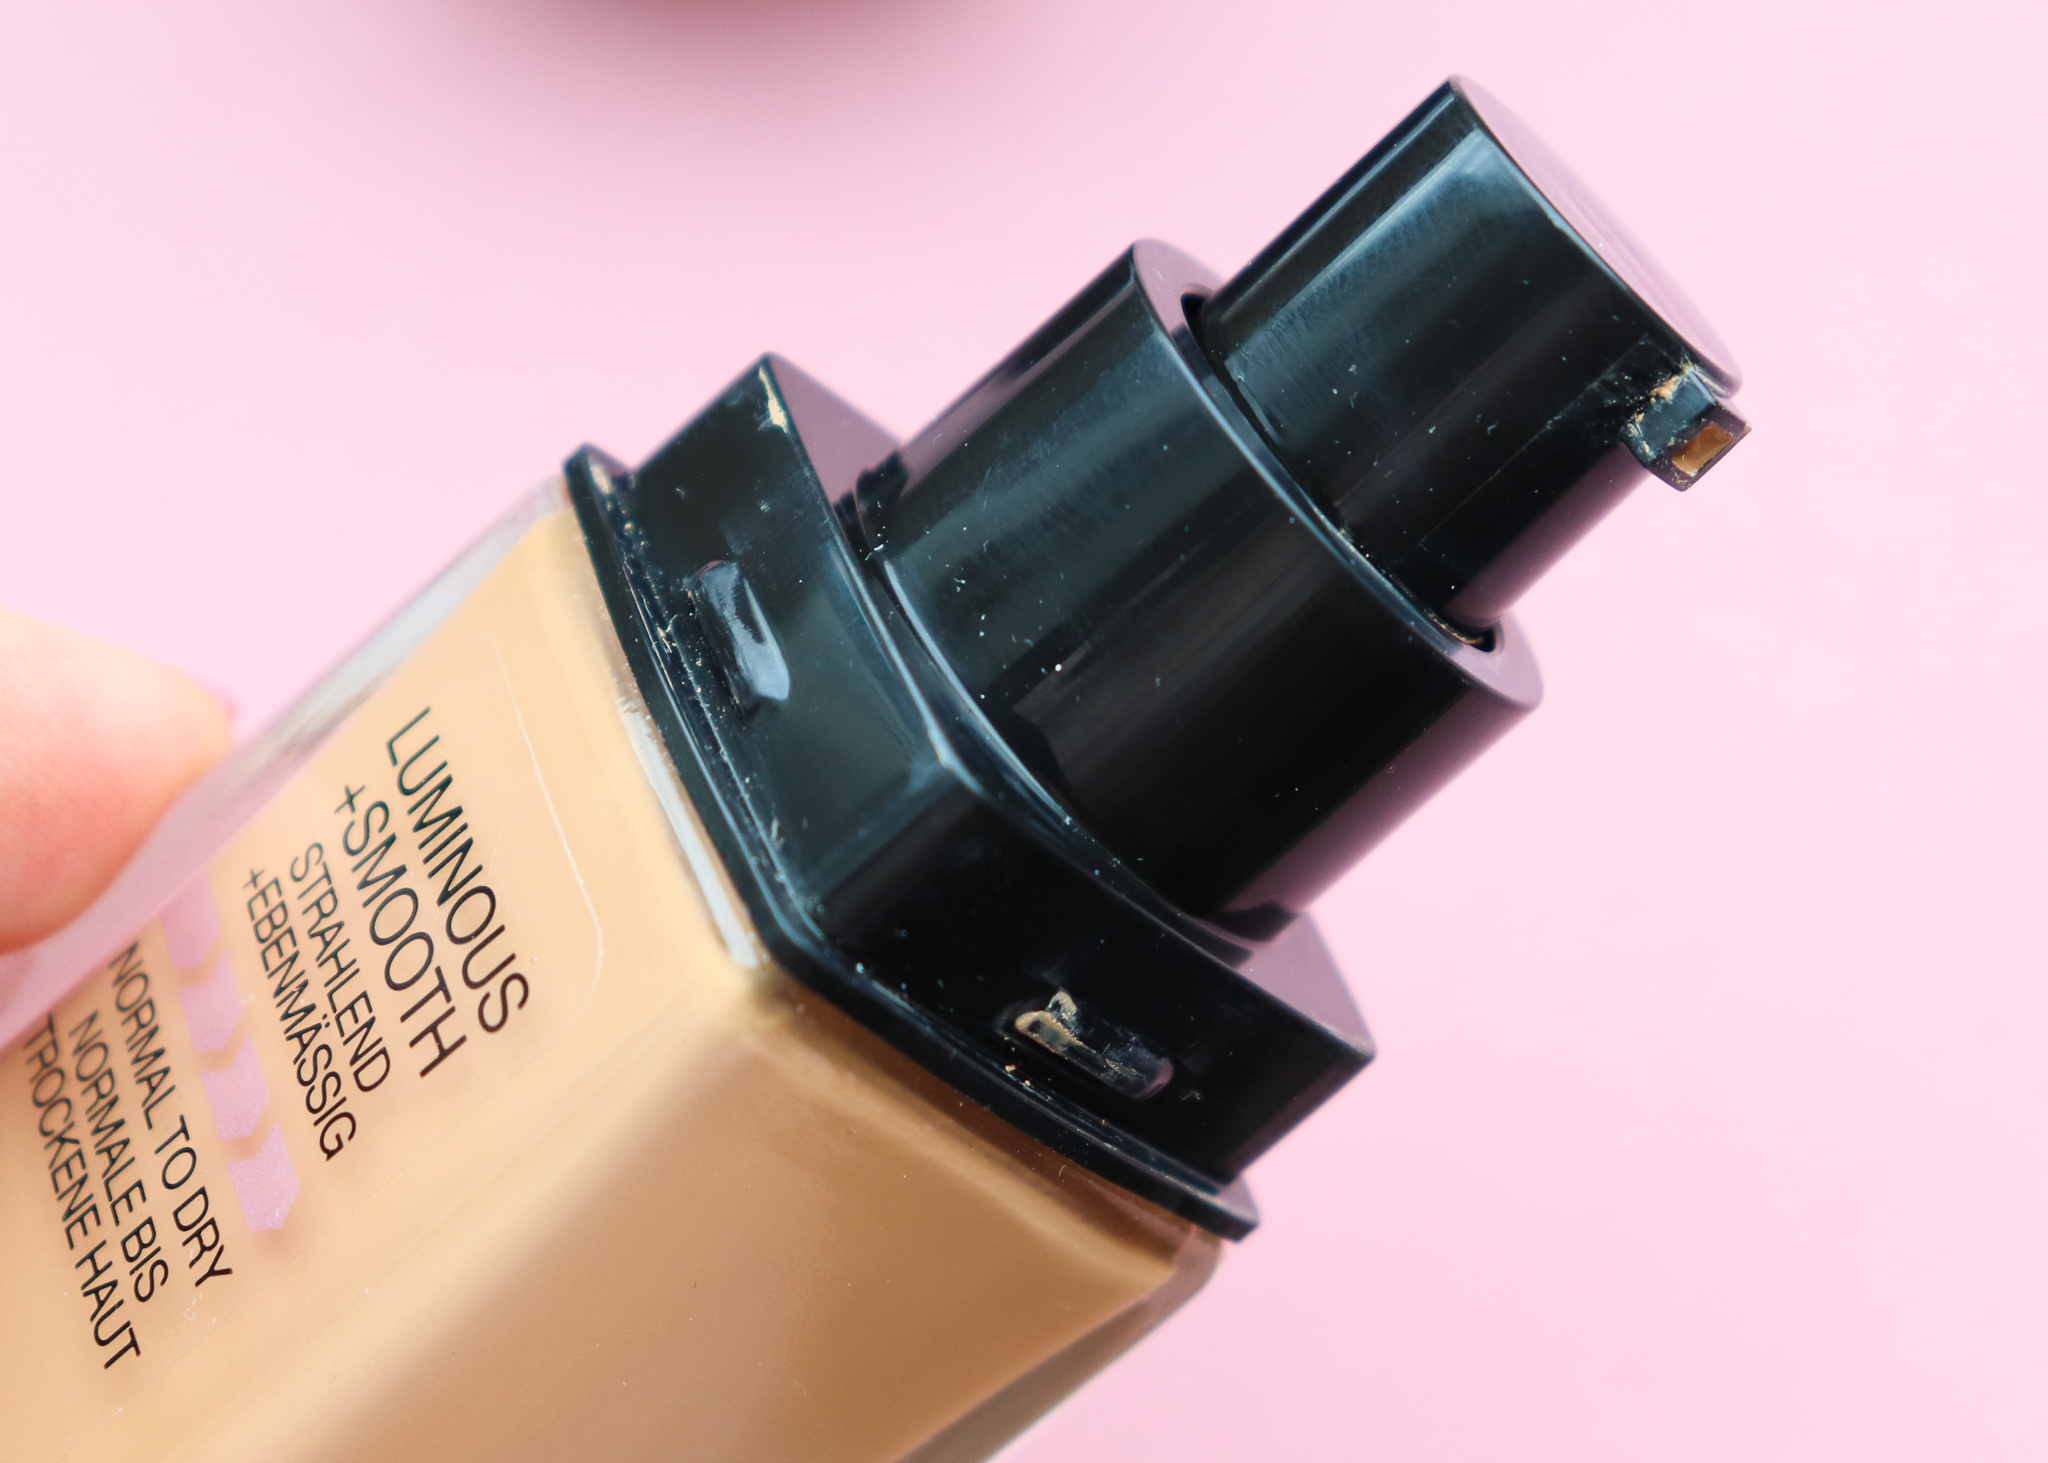 Maybelline Fit Me Dewy+Luminous+Smooth Foundation Review - Real